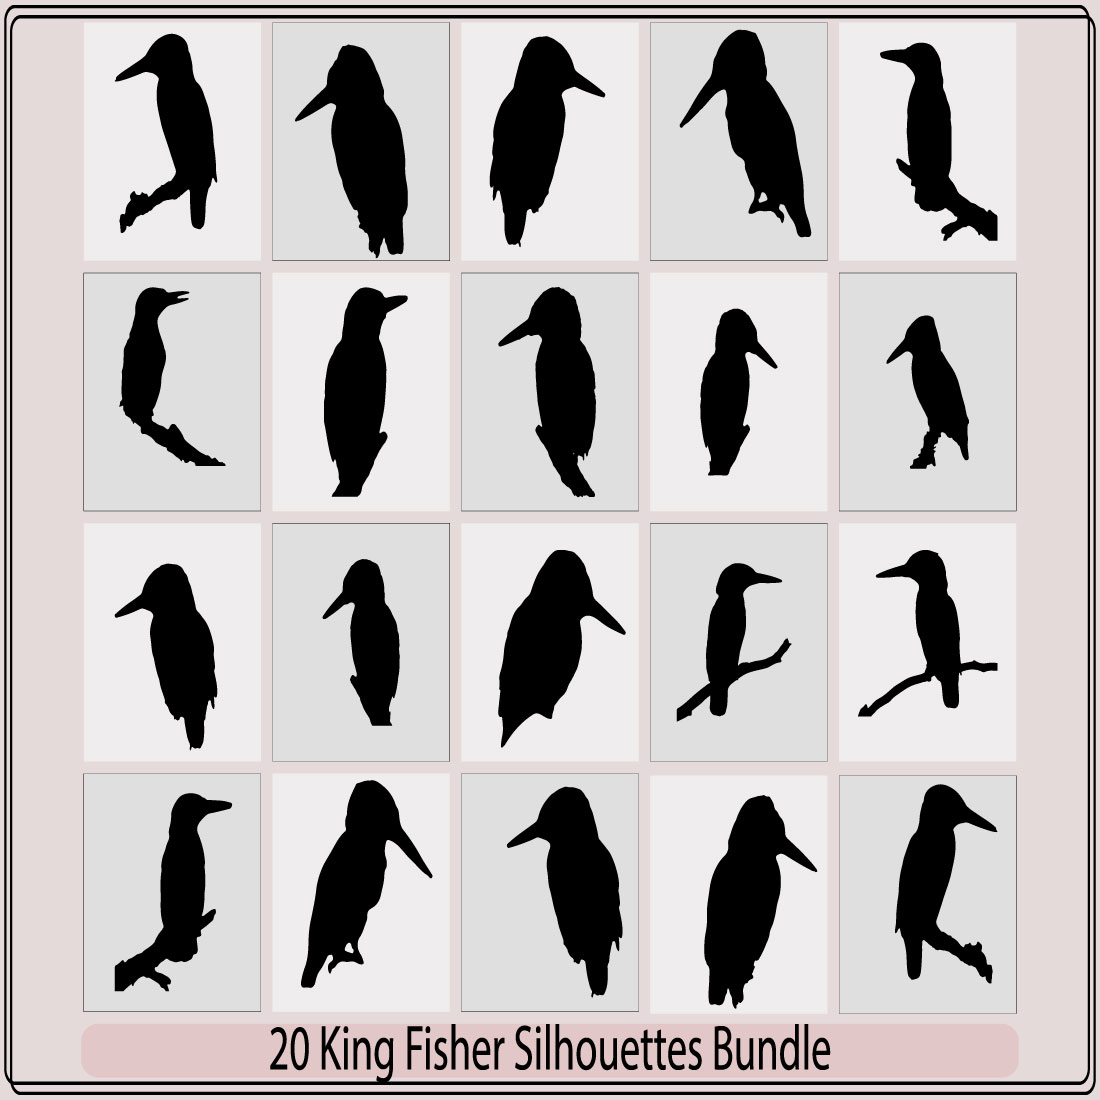 kingfisher silhouette,Flying kingfisher logo,silhouette of a flock of kingfishers,kingfishers on branch silhouette preview image.